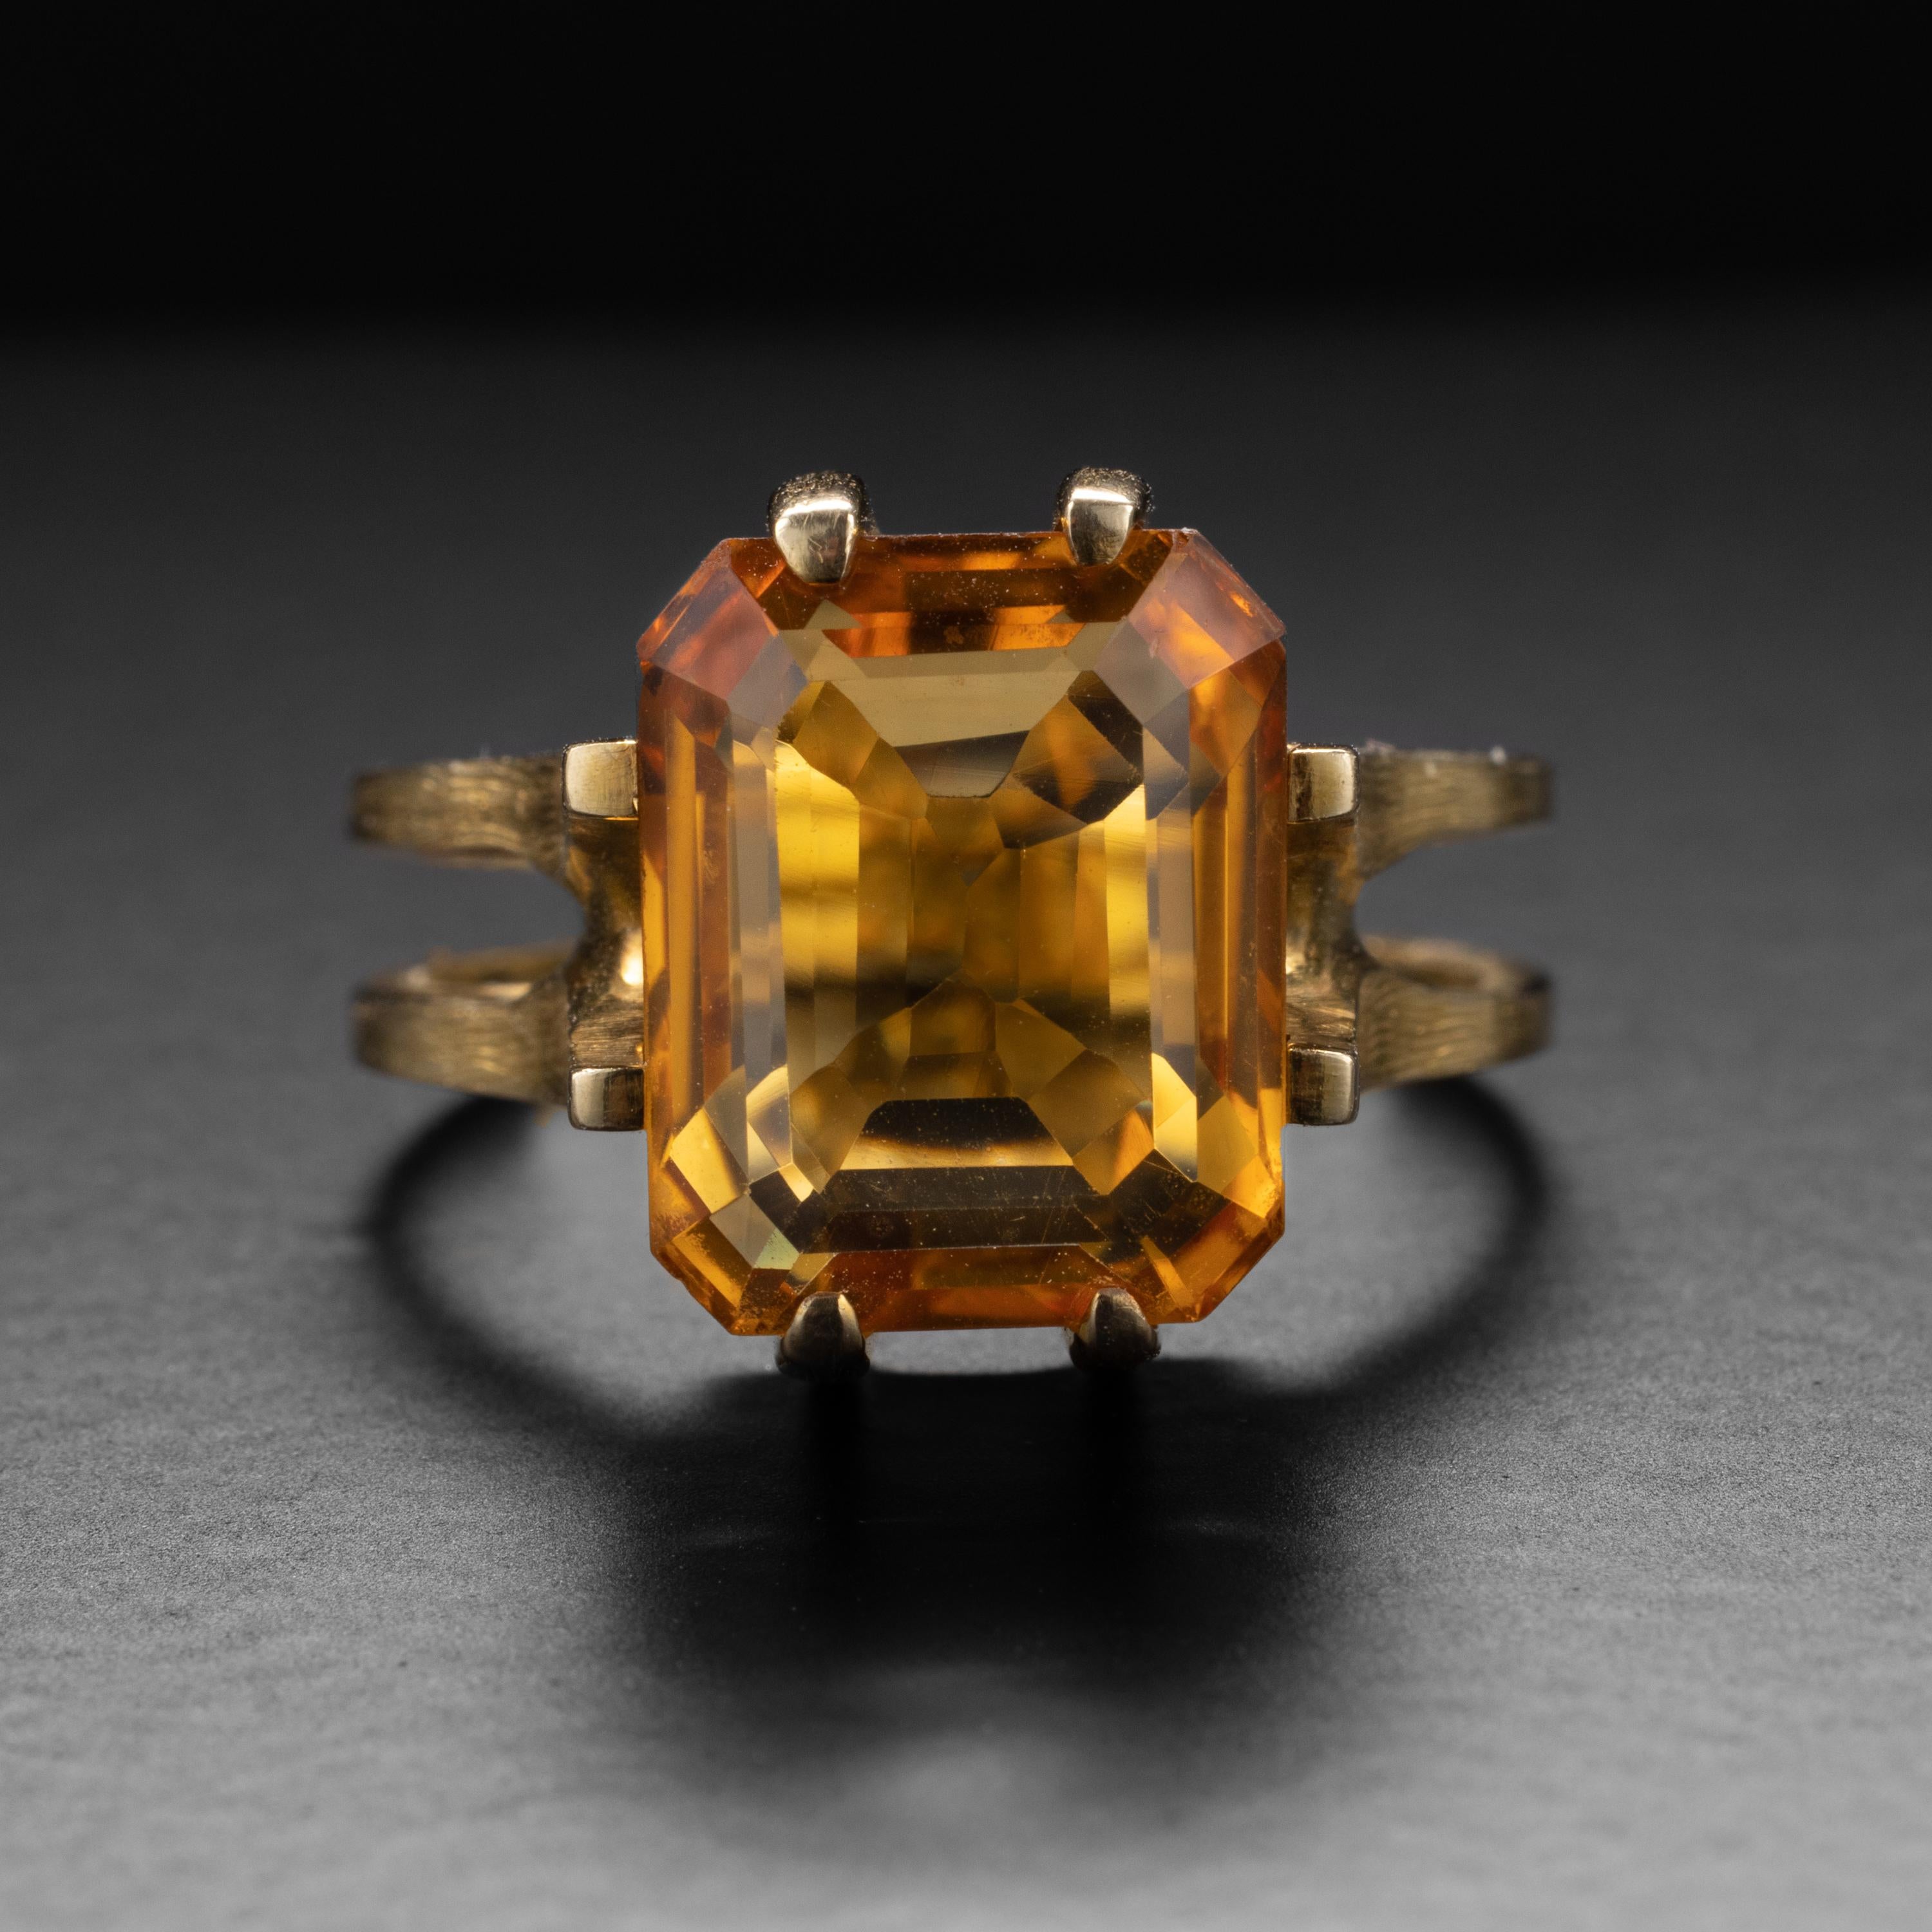 A rich, saturated natural citrine measuring approximately 12.27mm x 9.95 and weighing approximately 5 ¼ carats is the focal point of this truly unique, architectural ring from the Midcentury. 

While there is no maker's mark, the ring is stamped